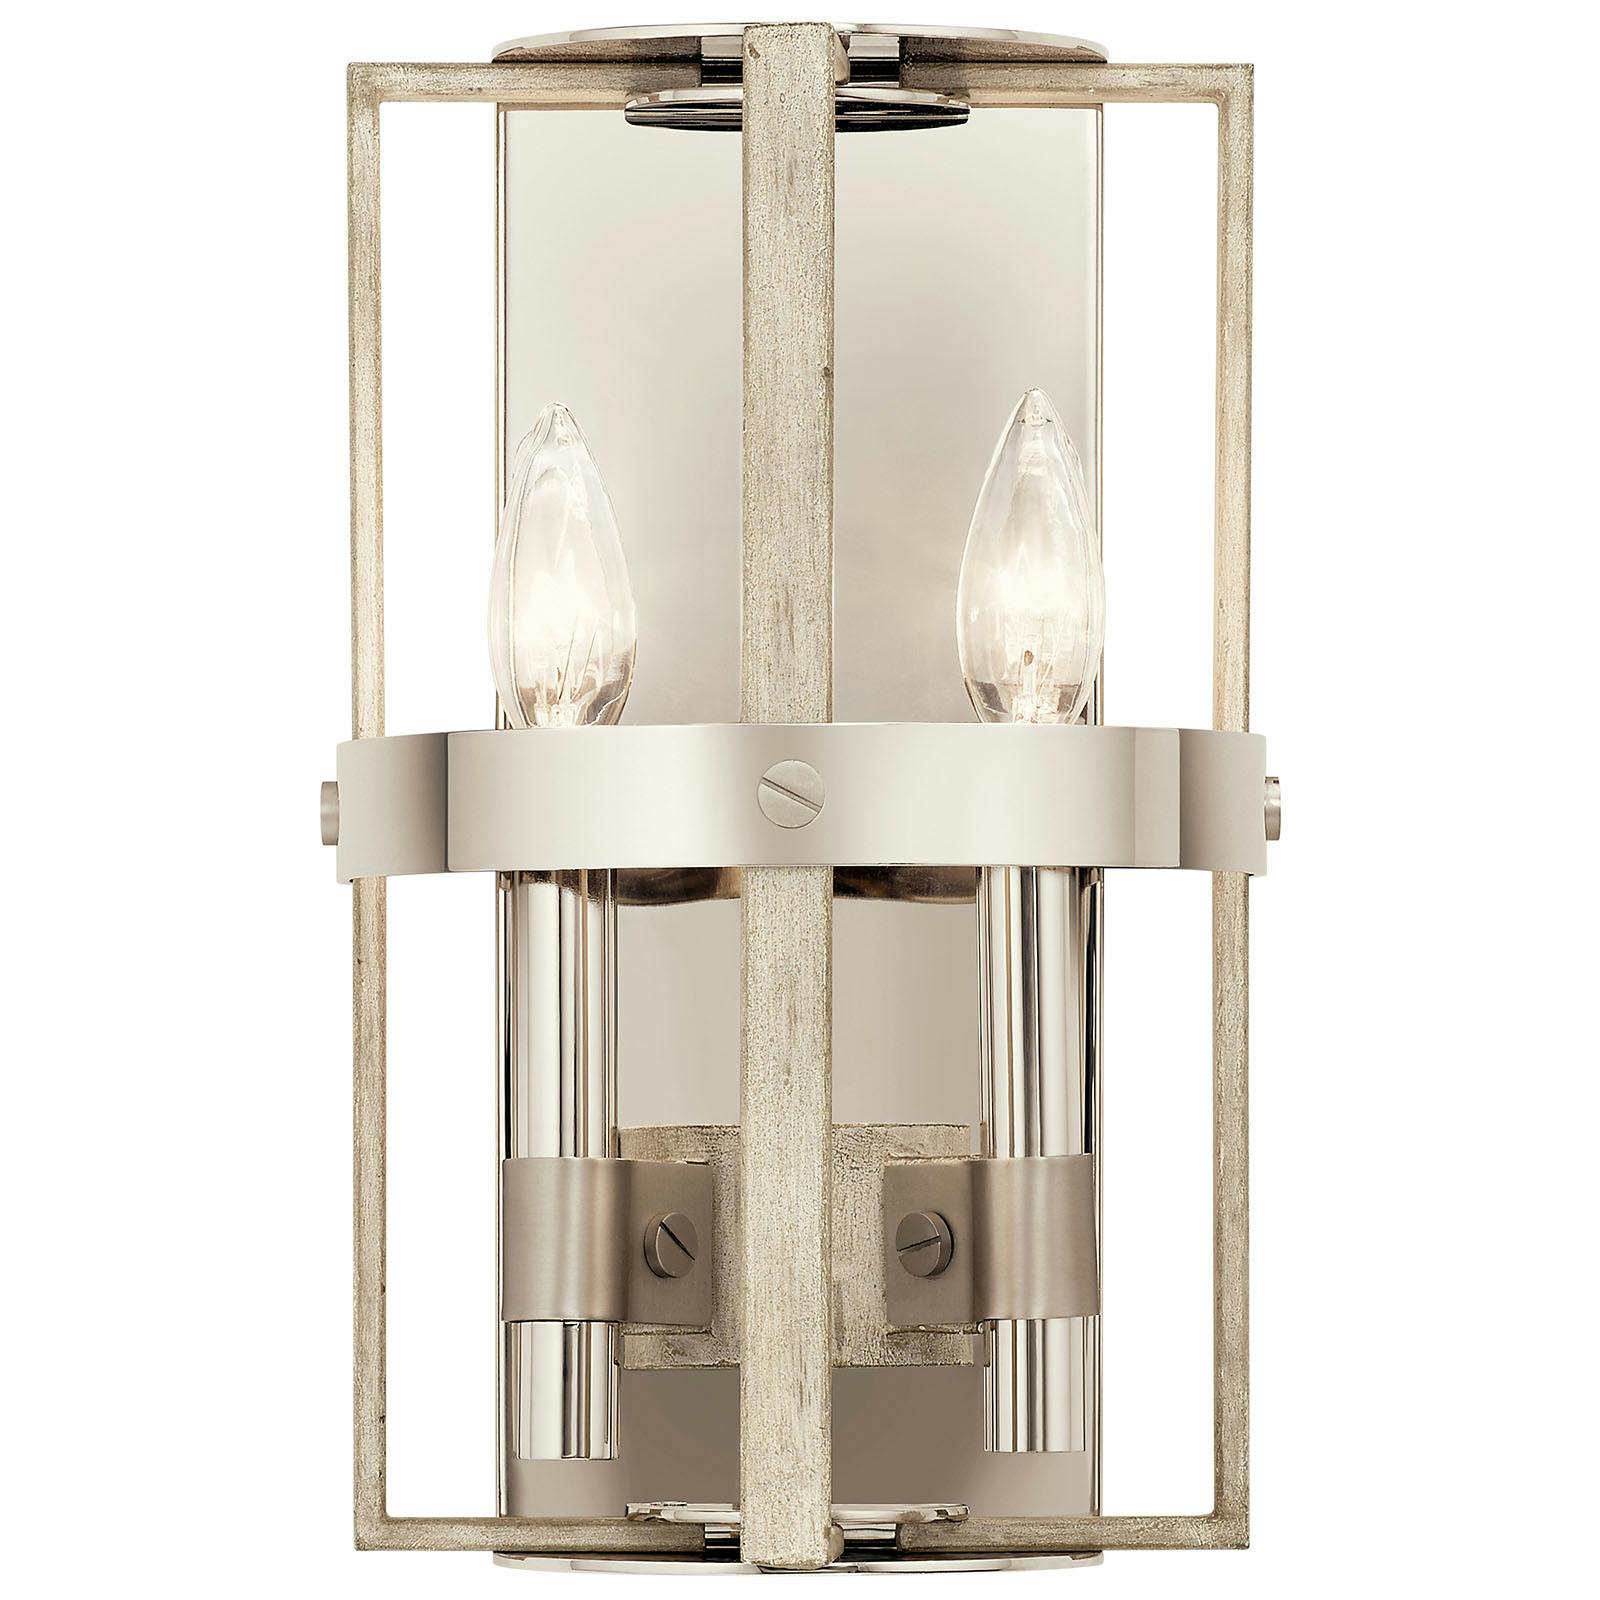 Front view of the Peyton 2 Light Sconce White Washed Wood on a white background